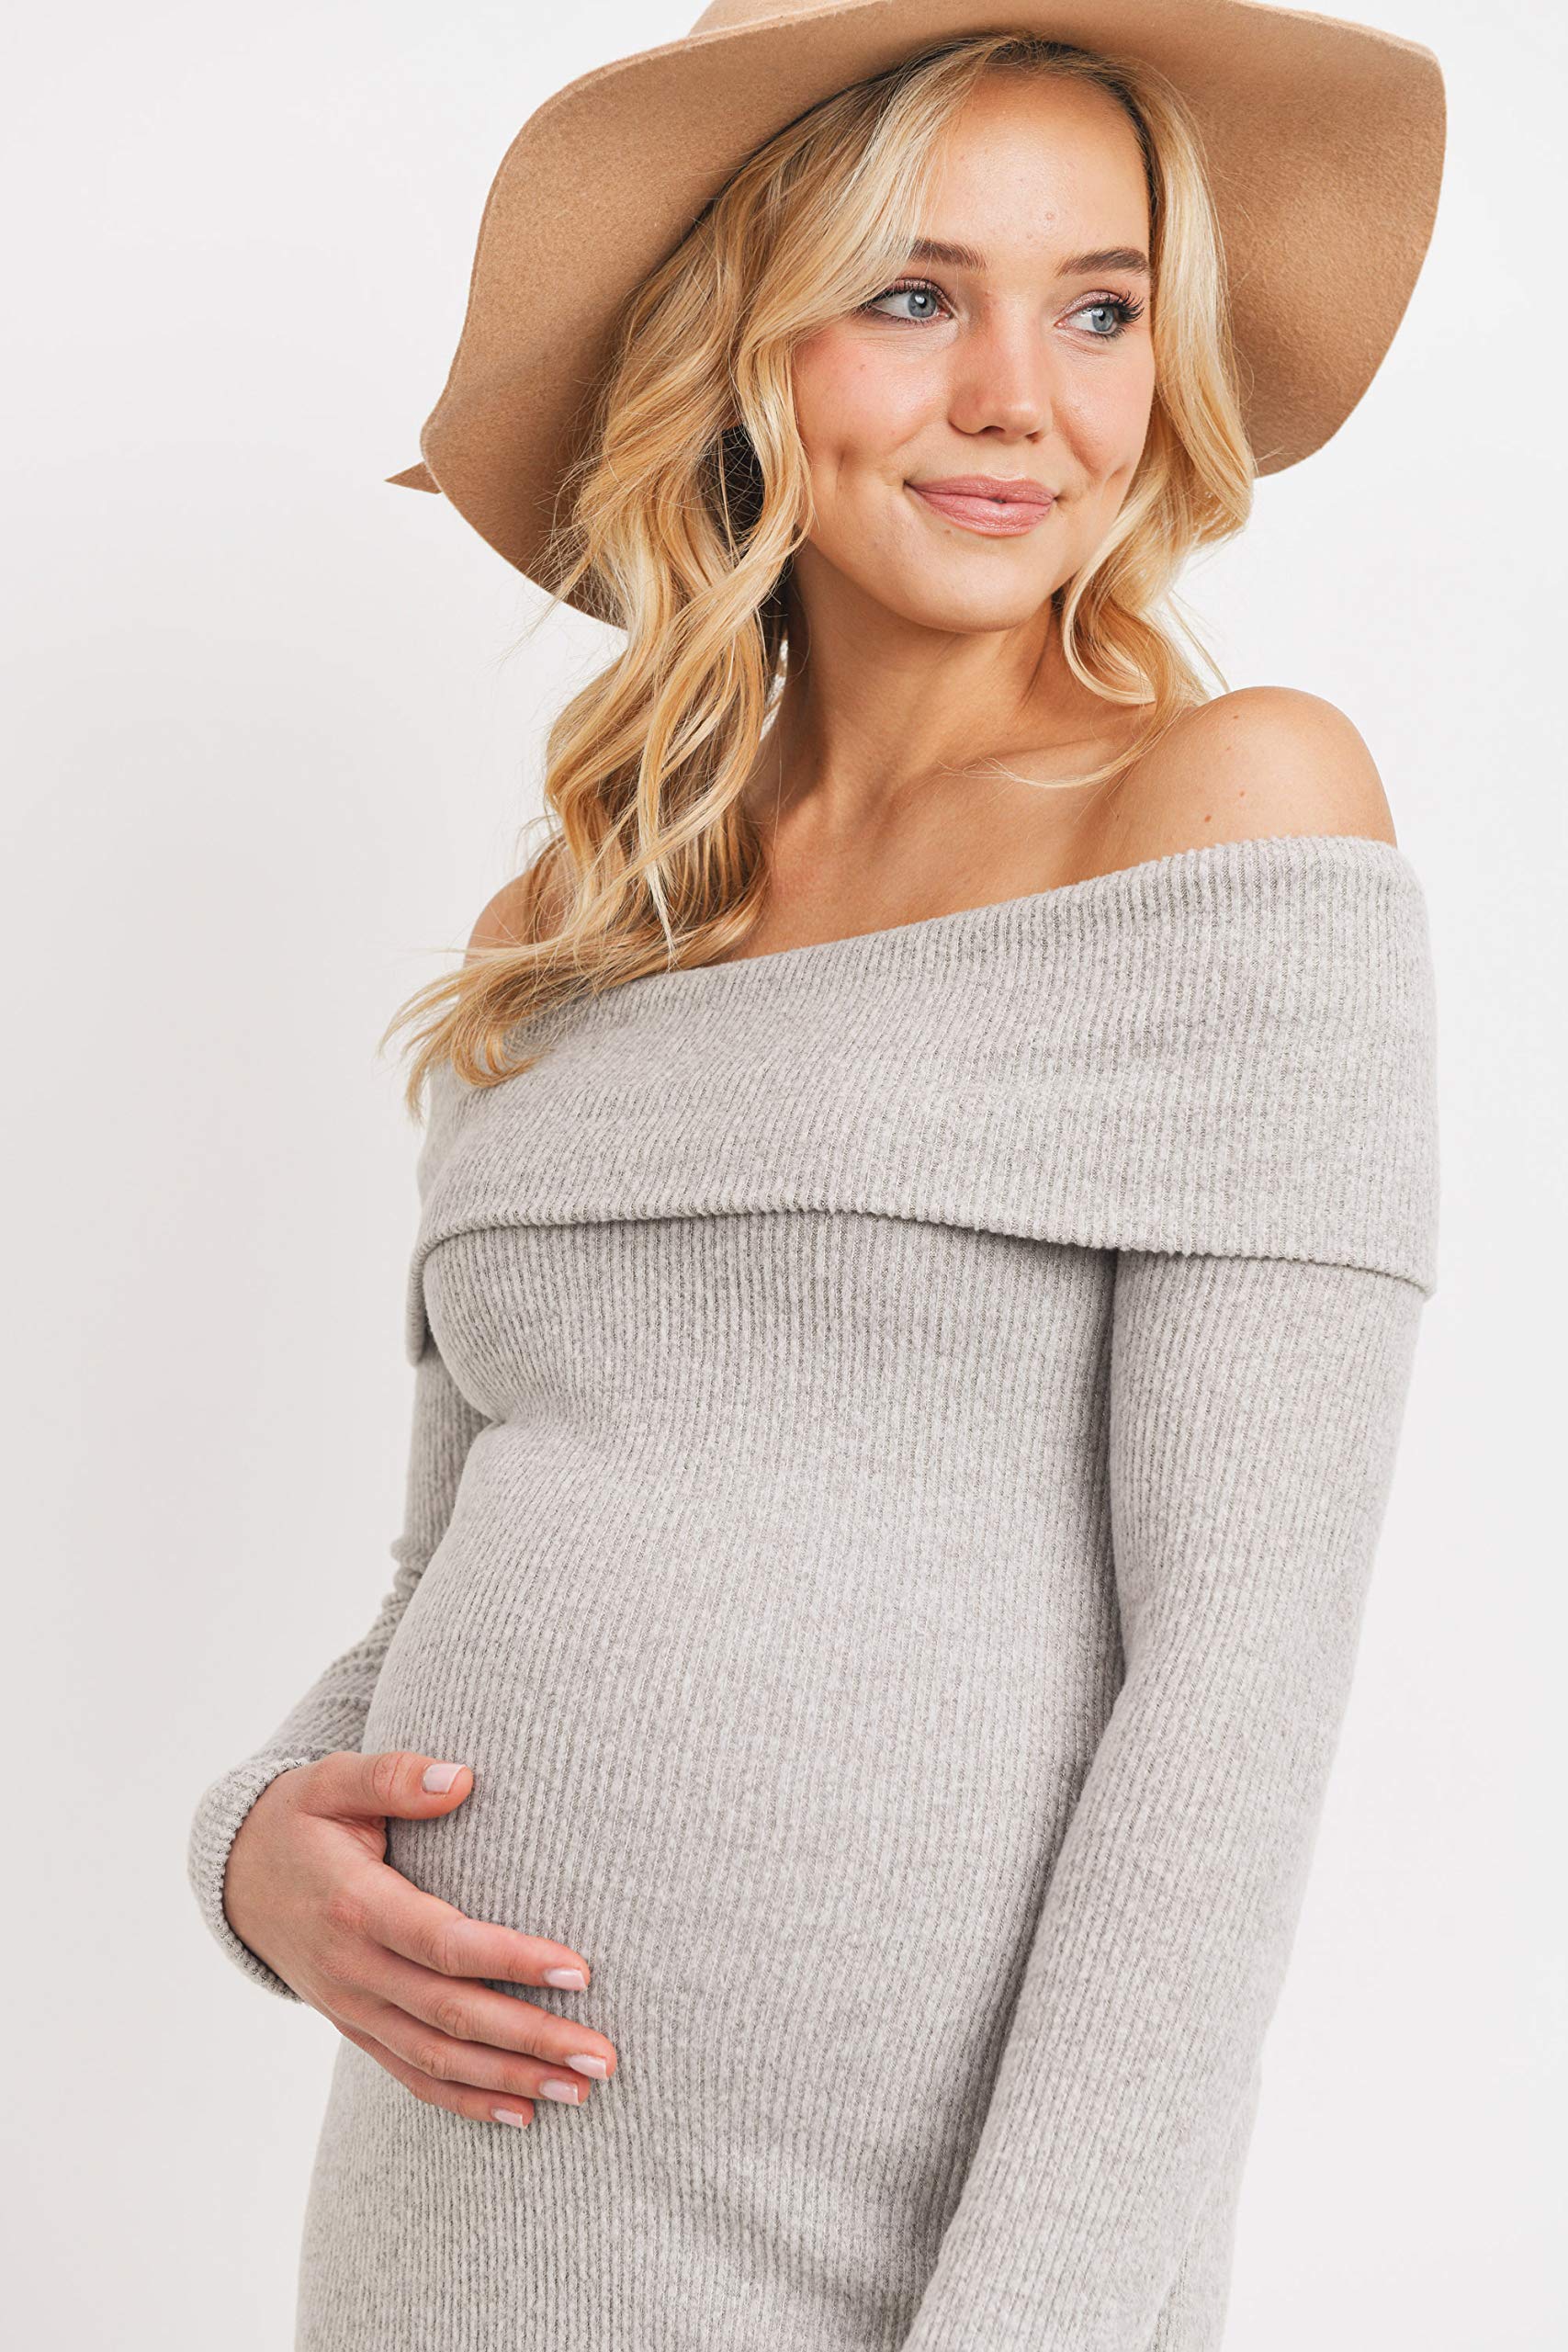 LaClef Women's Off Shoulder Sweater Knit Maternity Dress